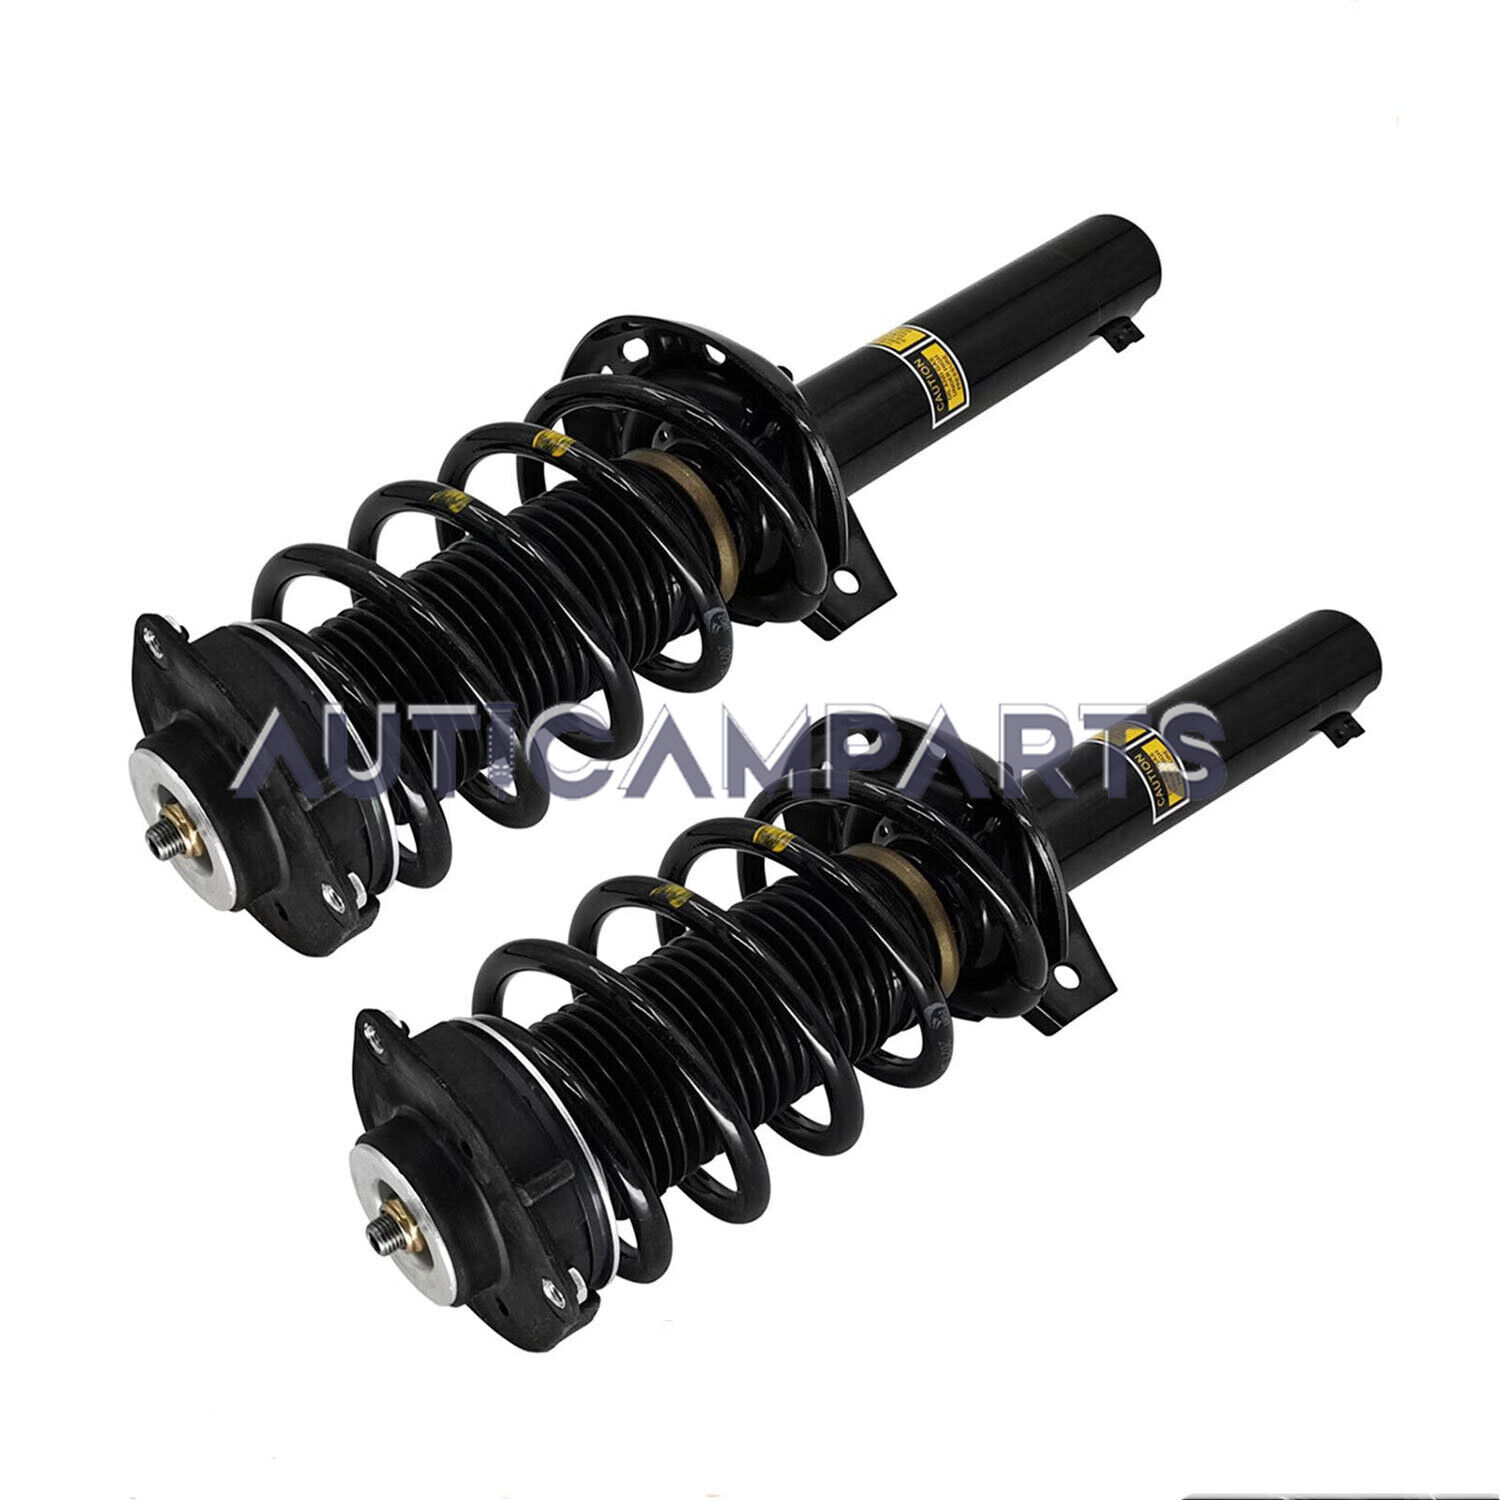 2x Front Shock Absorbers For Audi TT TTS MKII TTRS Quattro 2007-15 Magnetic Ride